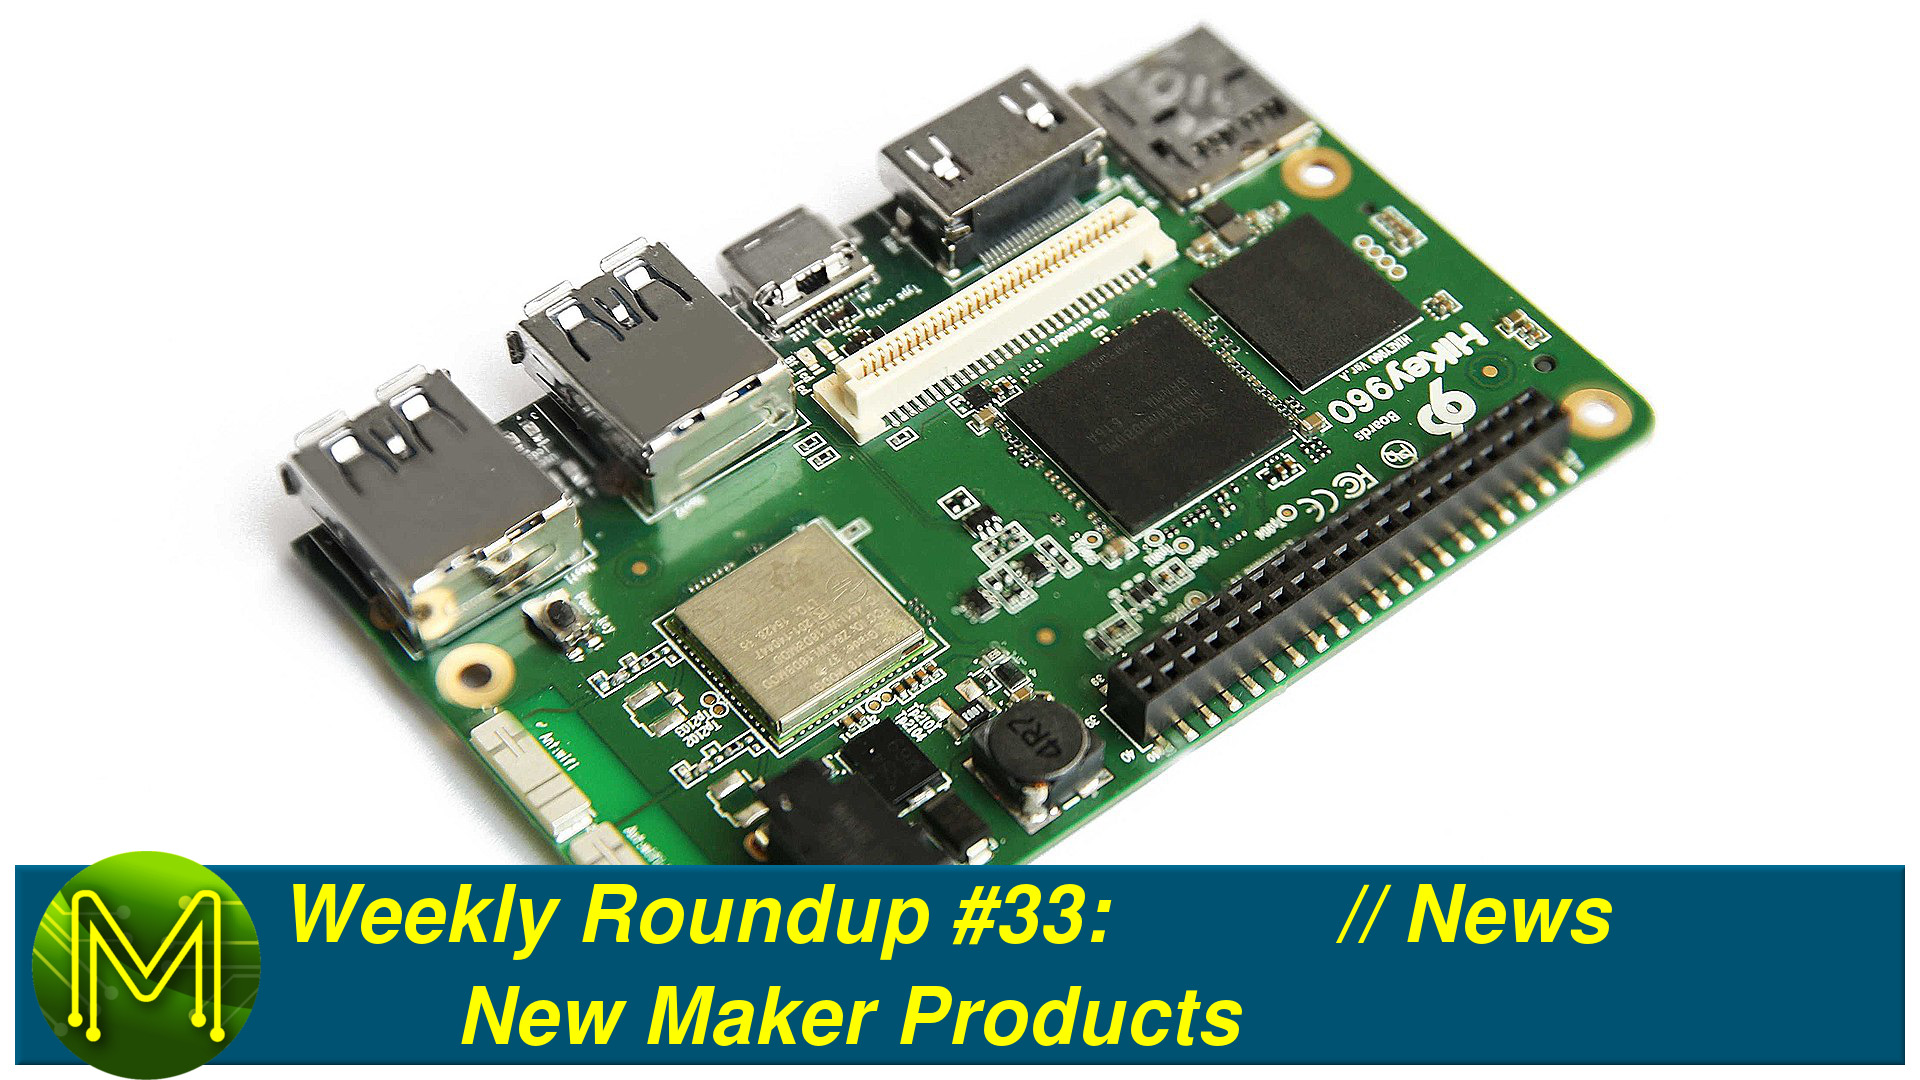 Weekly Roundup #33 - New Maker Products // News